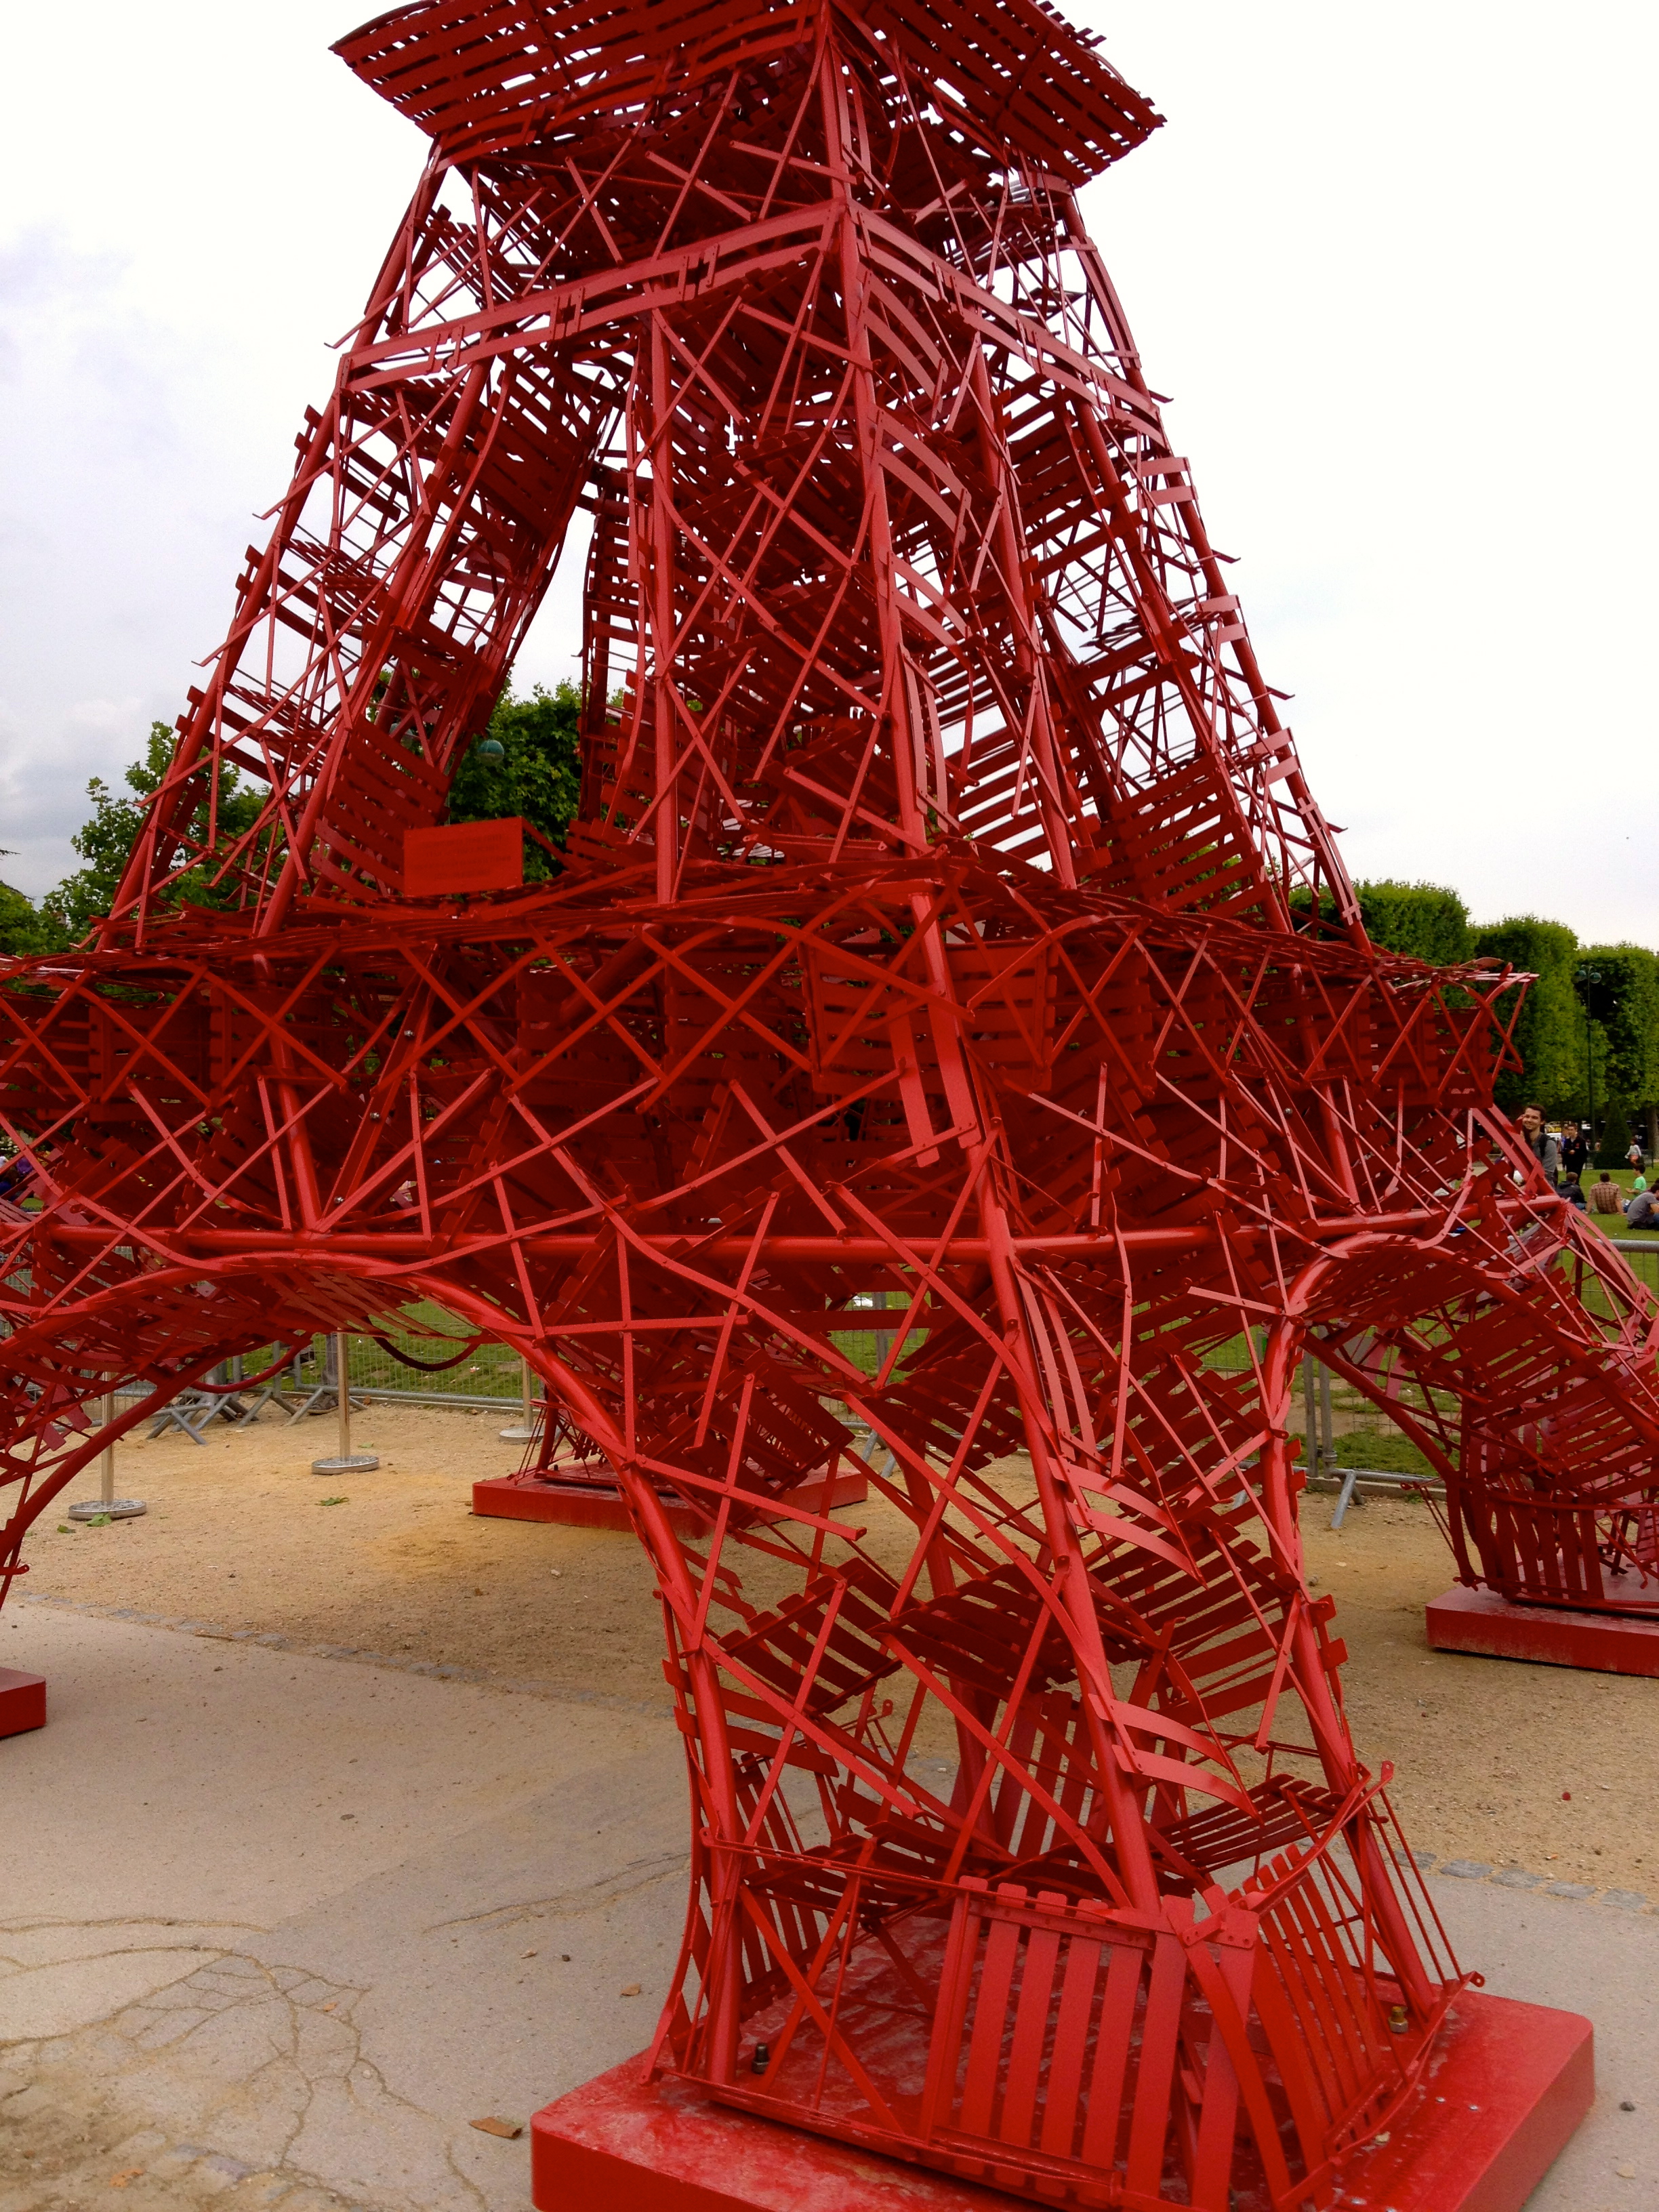 Eiffel Tower recreated with red chairs in 125th anniversary 